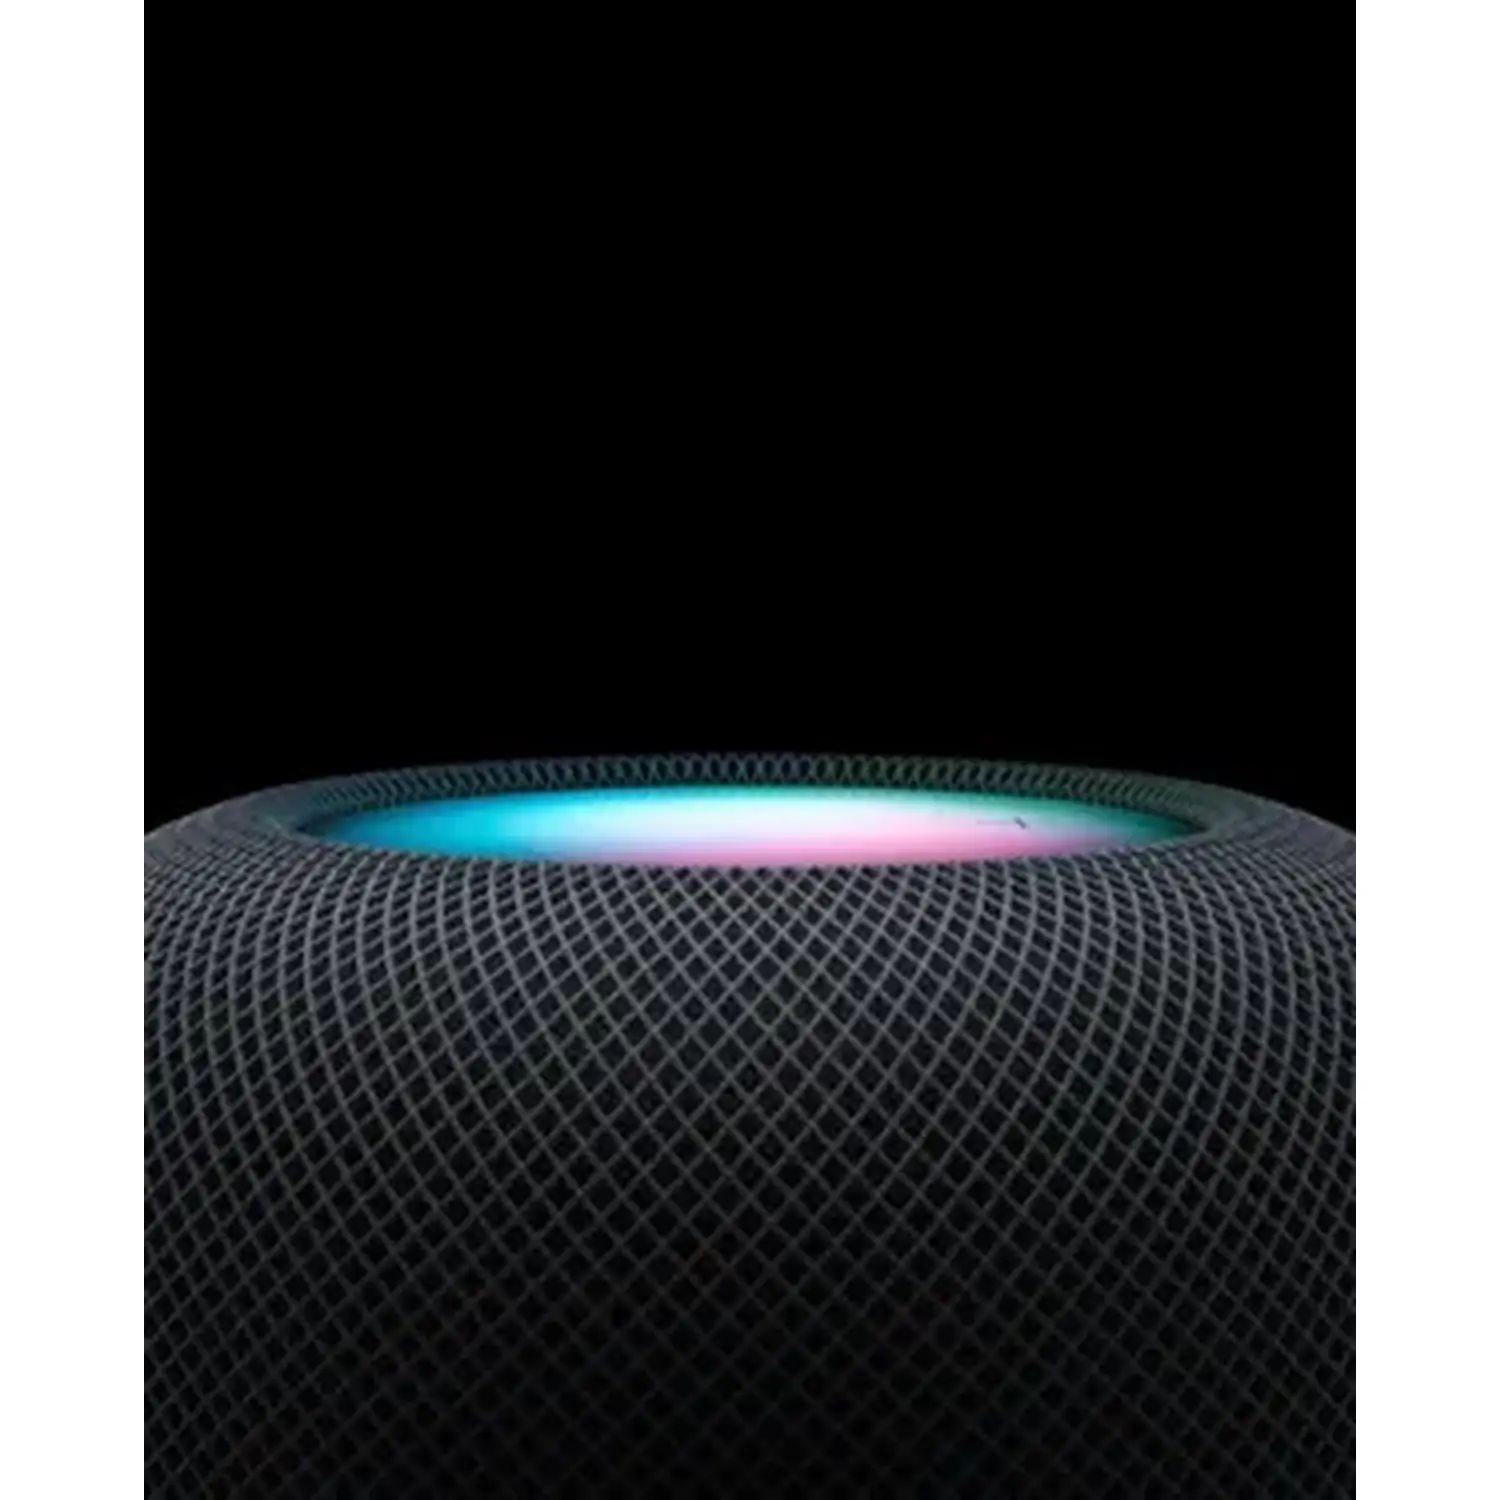 Buy Apple Homepod Vocals Music Listening Sweet 2: Spot with Smart Clear